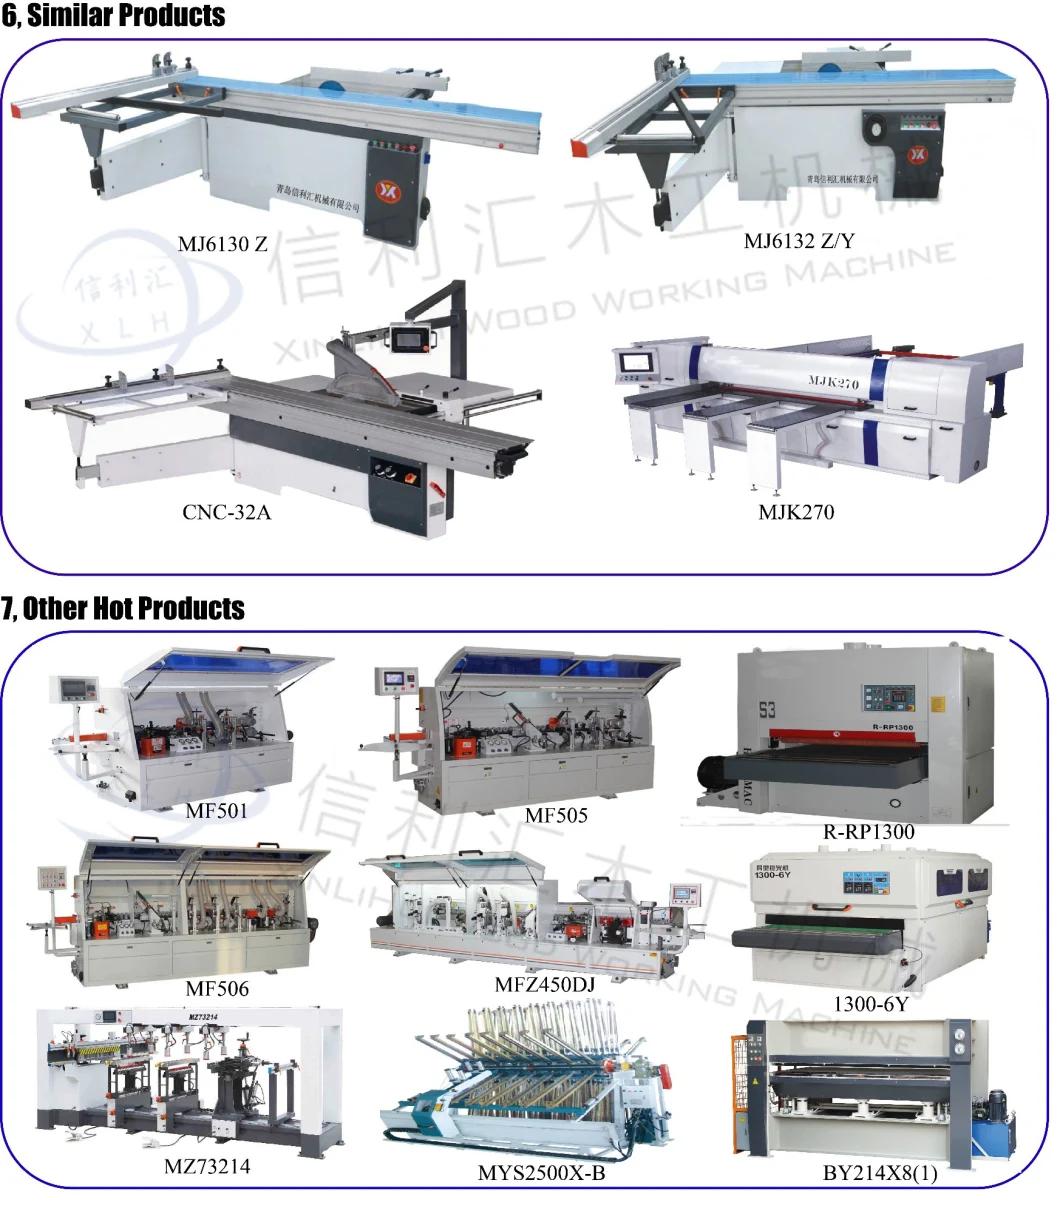 2800 Working Length 90 Tilting Degree Semi-Density Flake Board Panel Saw Machine Export Manufacture for Wood Working Machines Wood Saw Cutting Small Sawmill